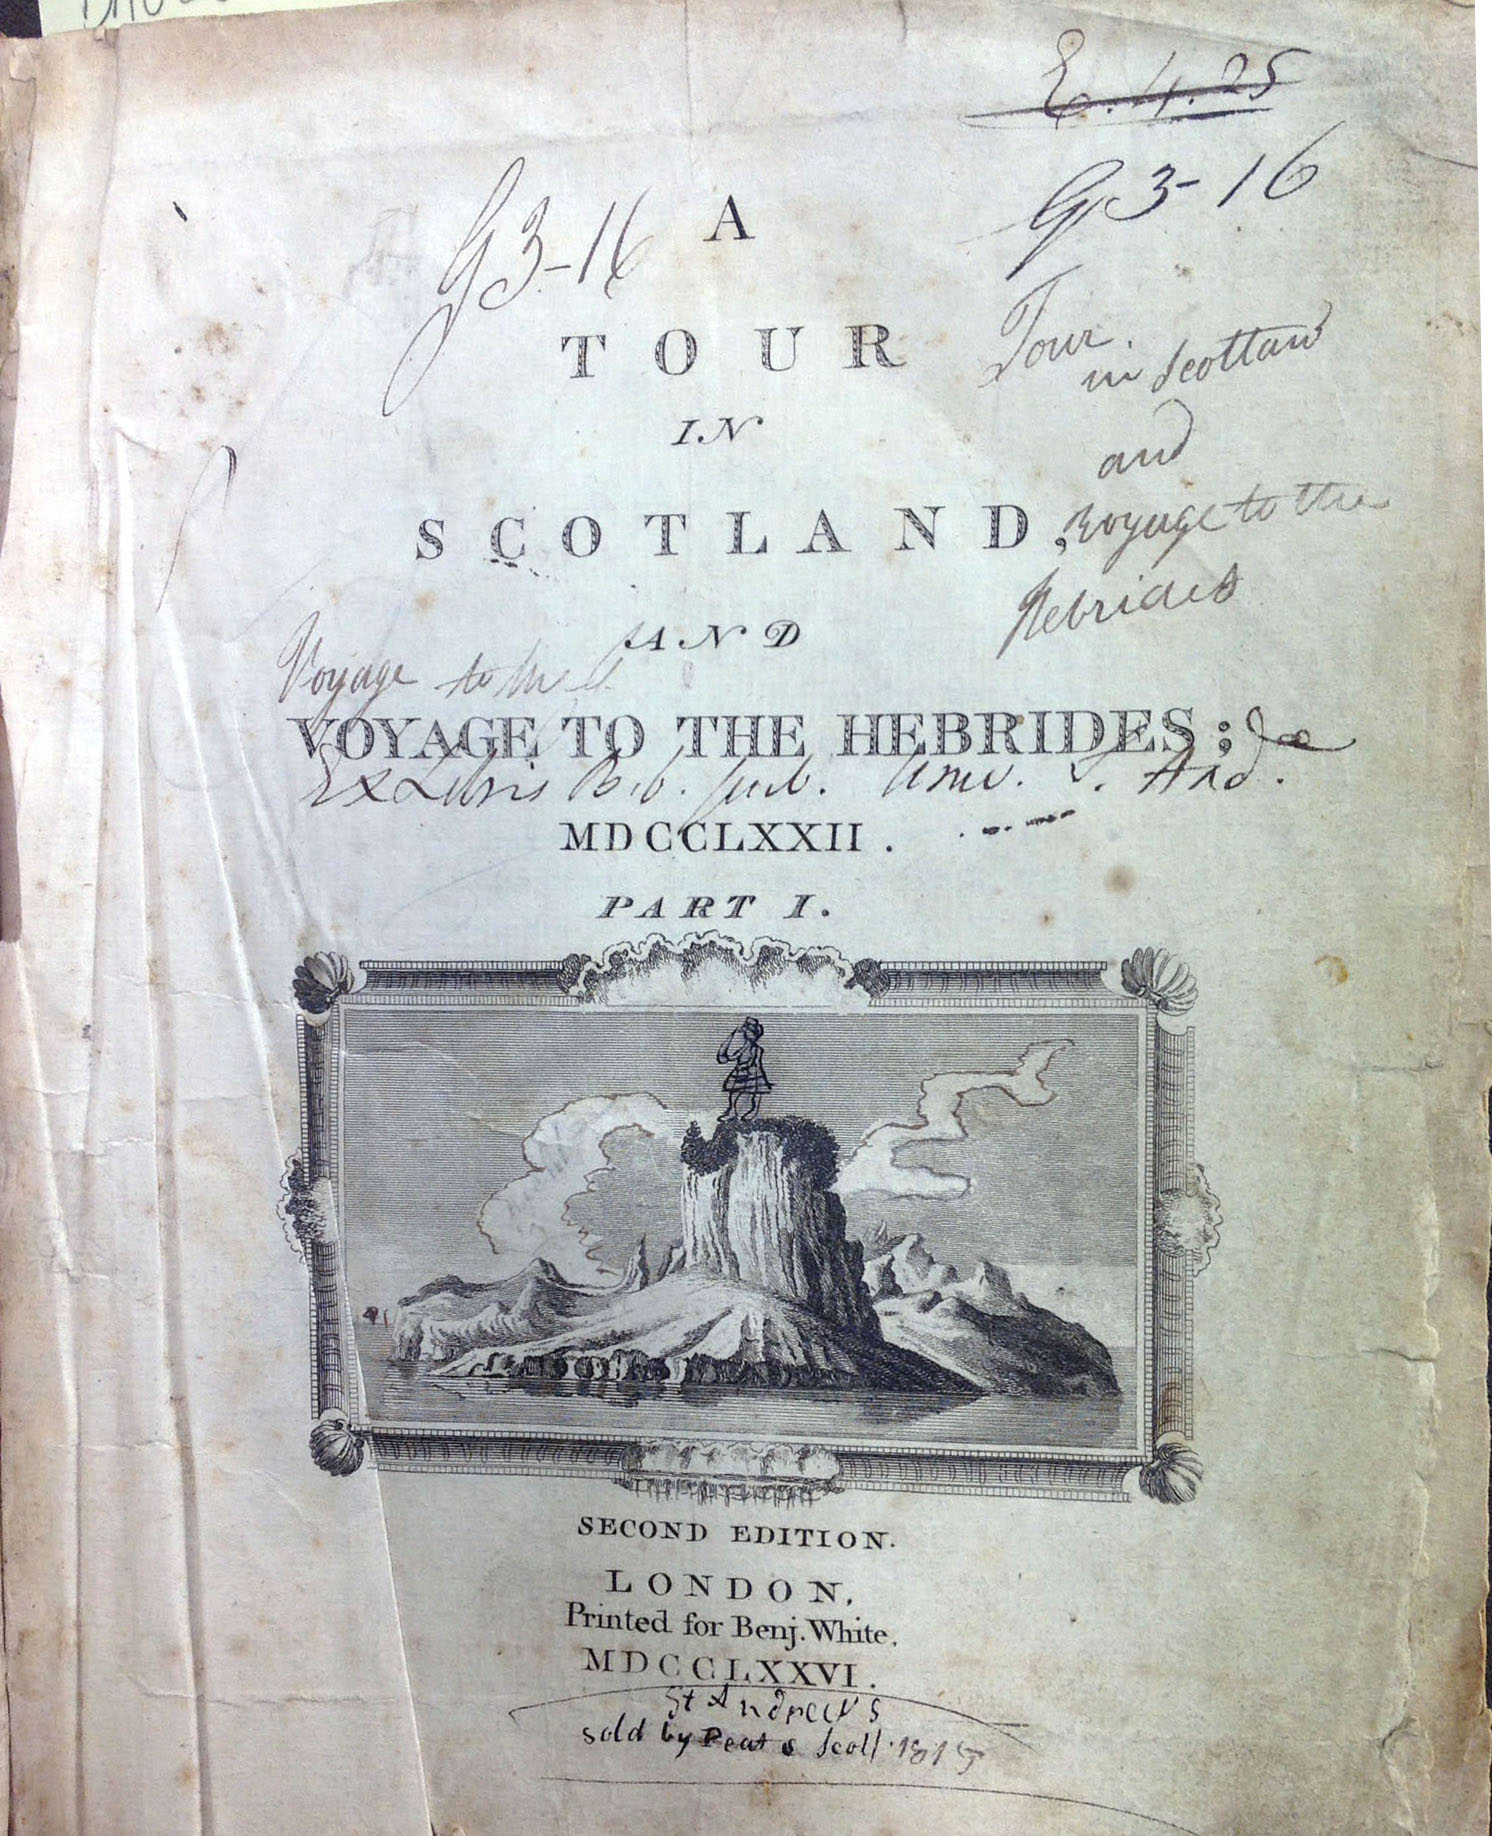 A tour in Scotland, and voyage to the Hebrides; MDCCLXXII. Part I.